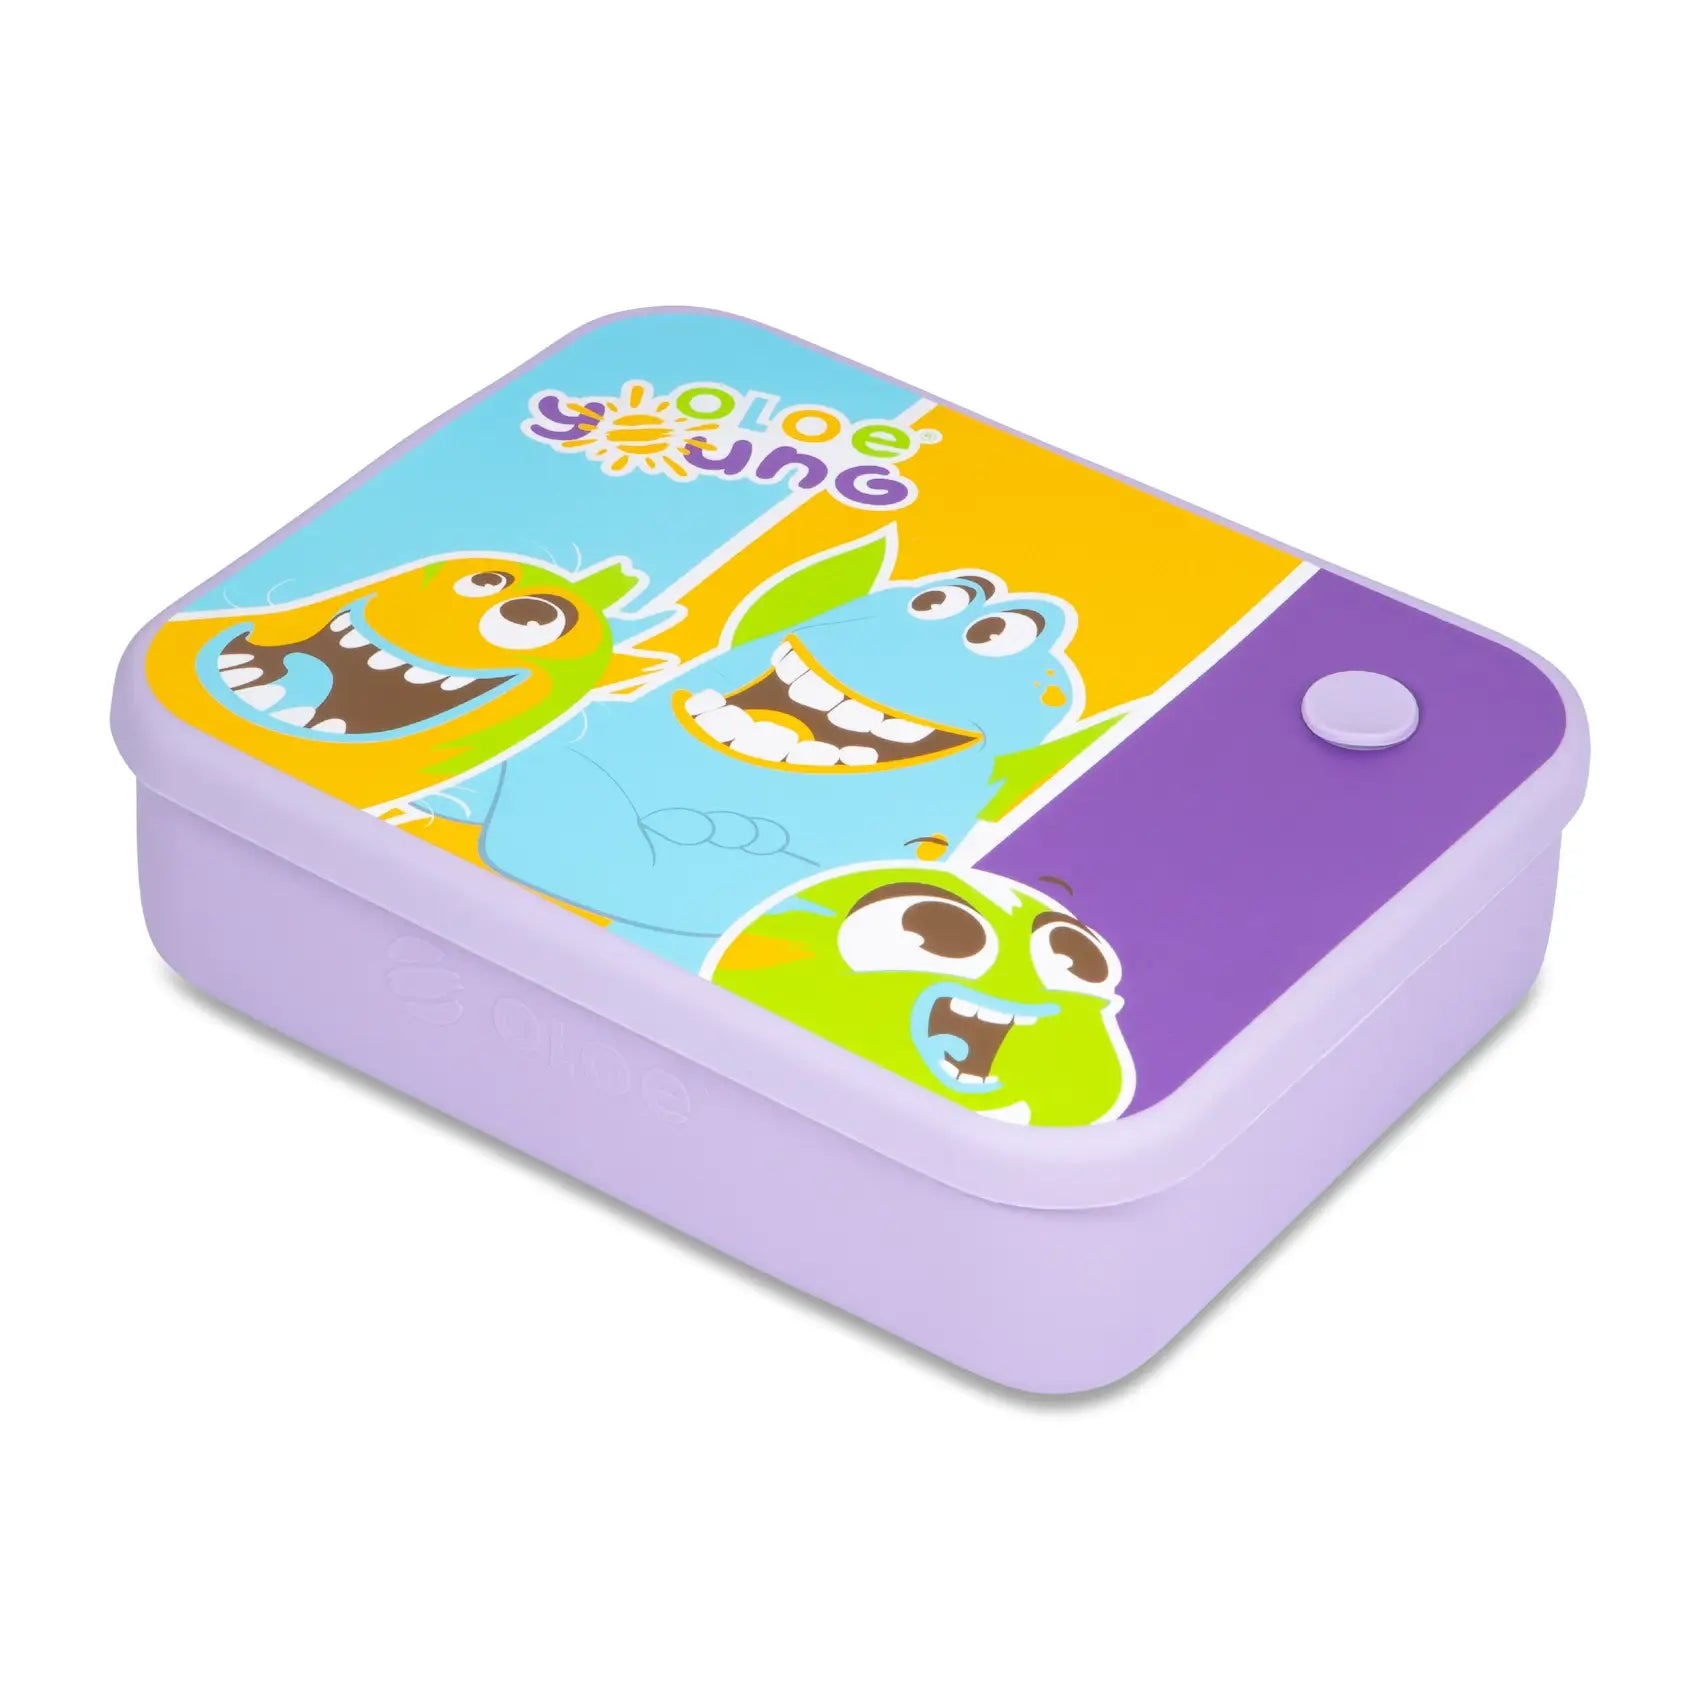 oloe-character-silicone-lunchbox-purple-top-facing